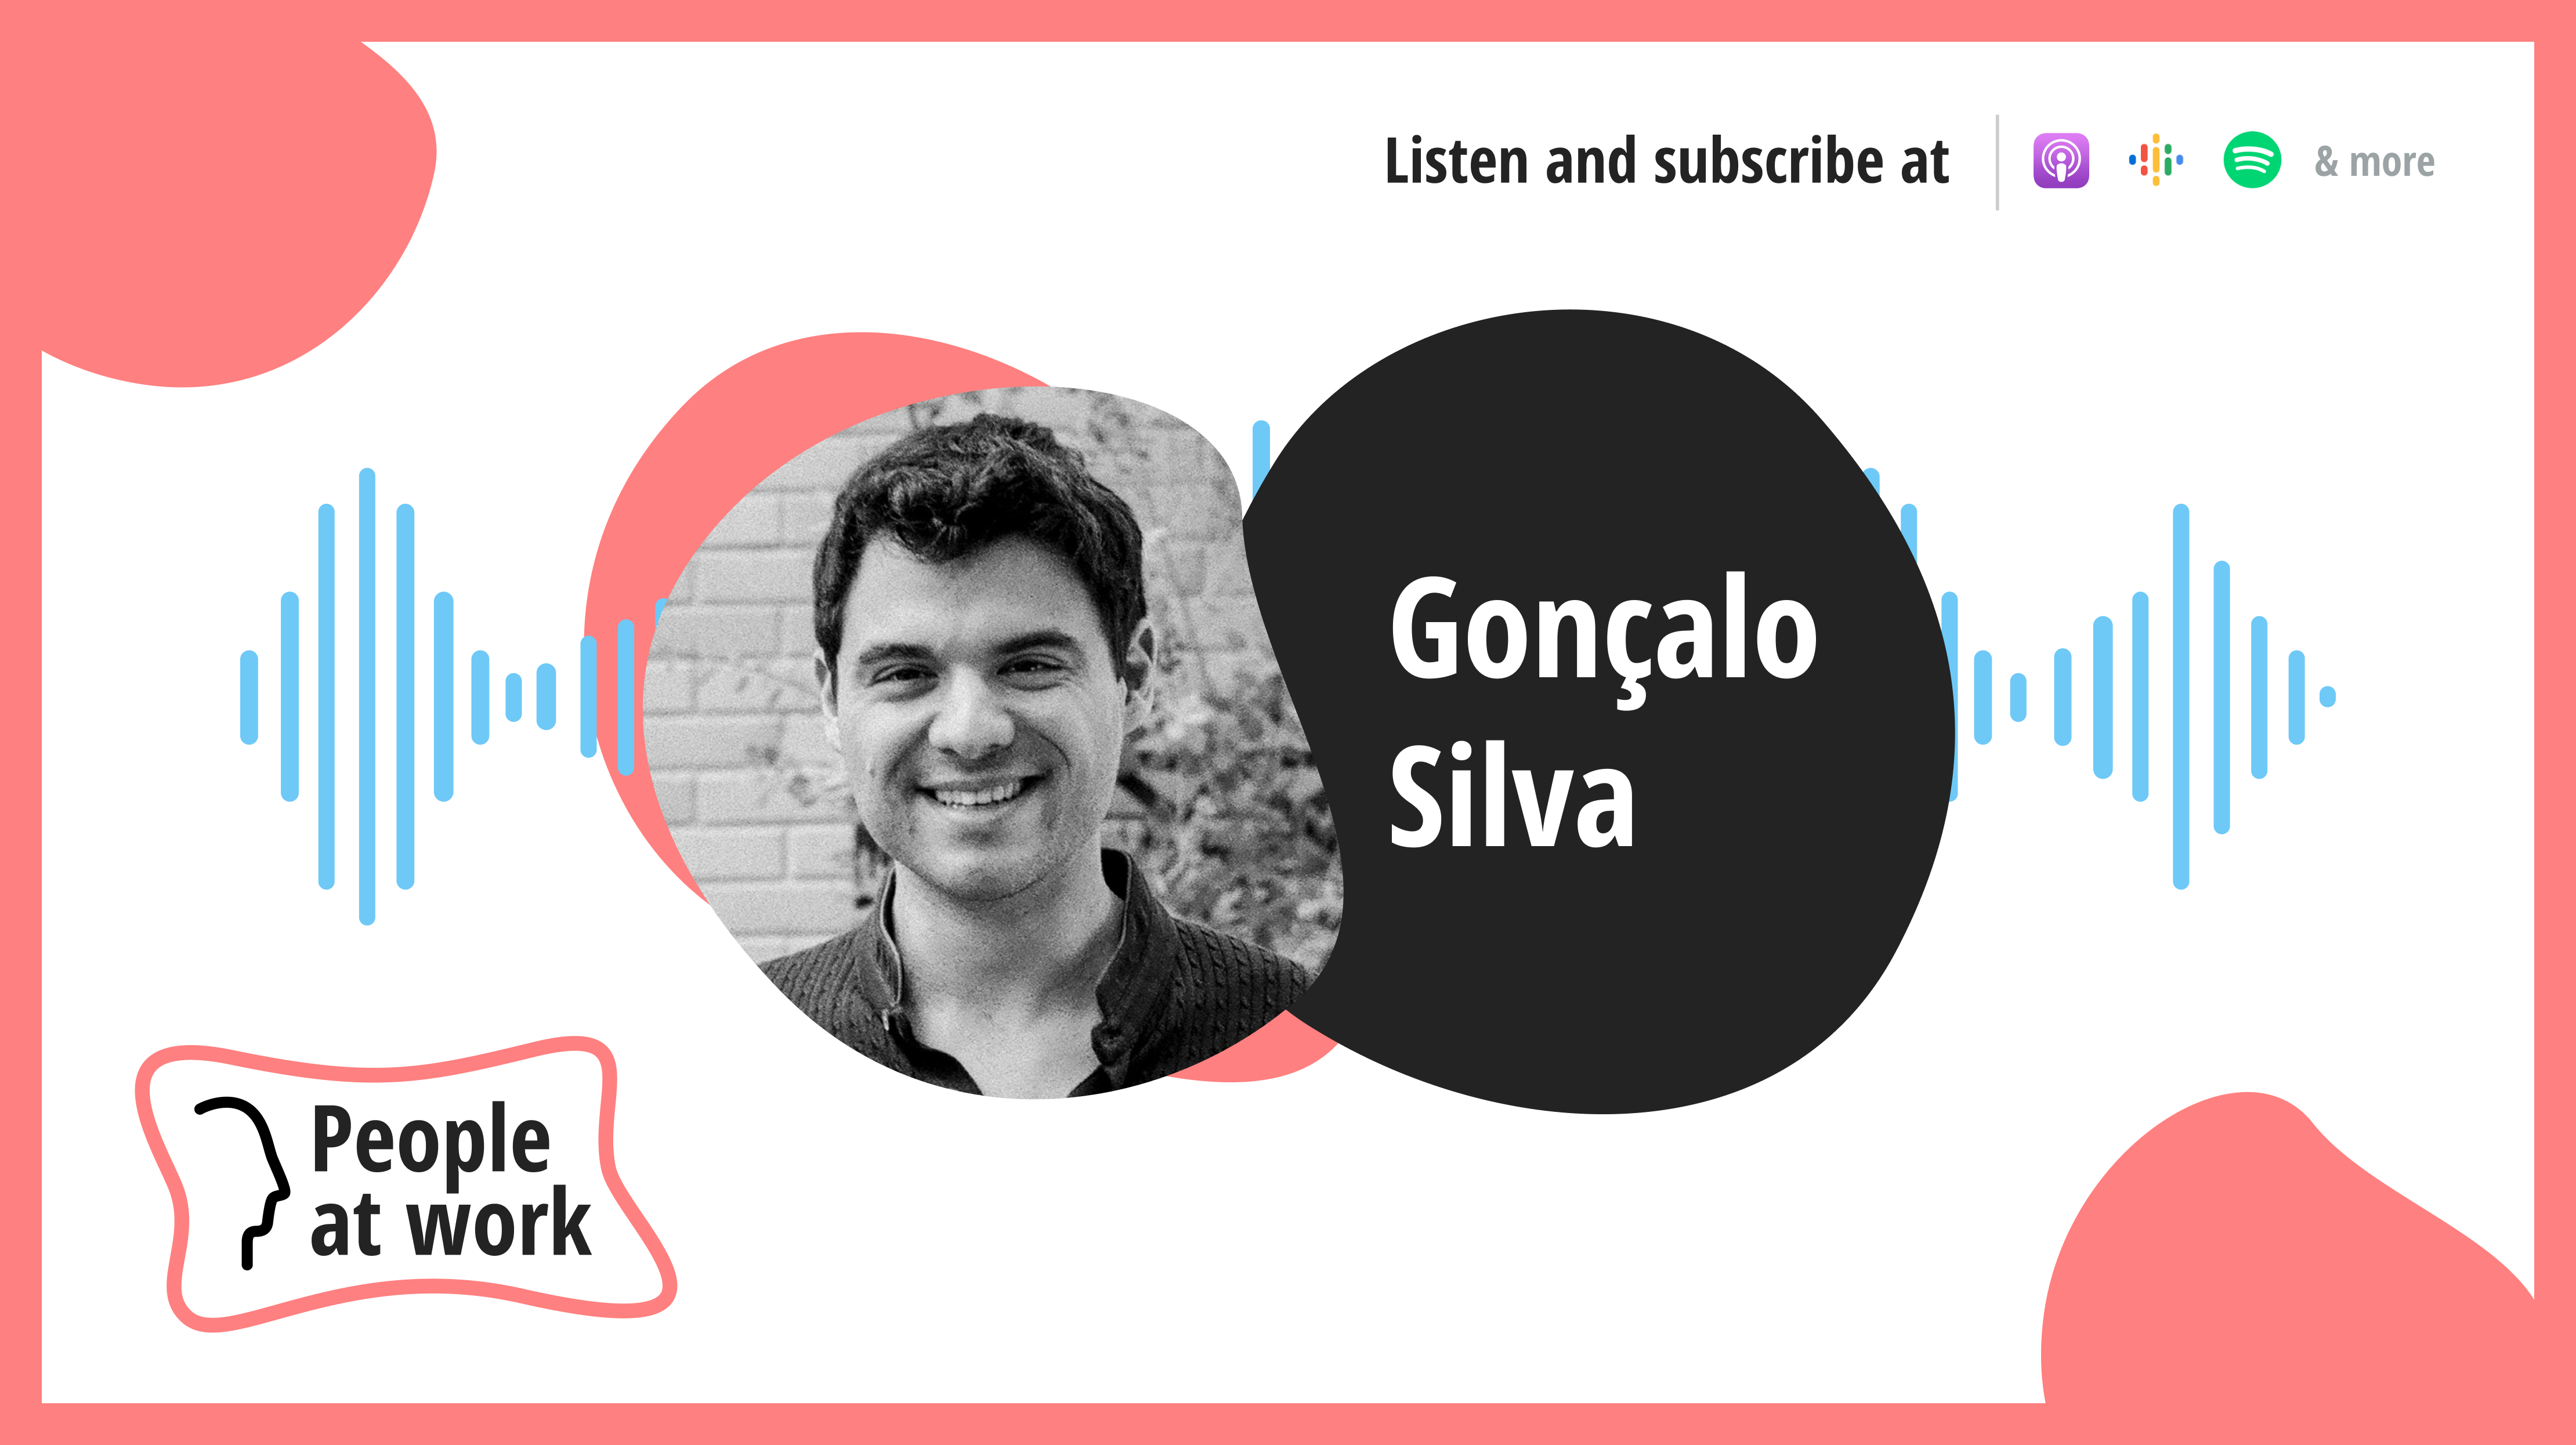 Trust is essential in remote companies with Gonçalo Silva